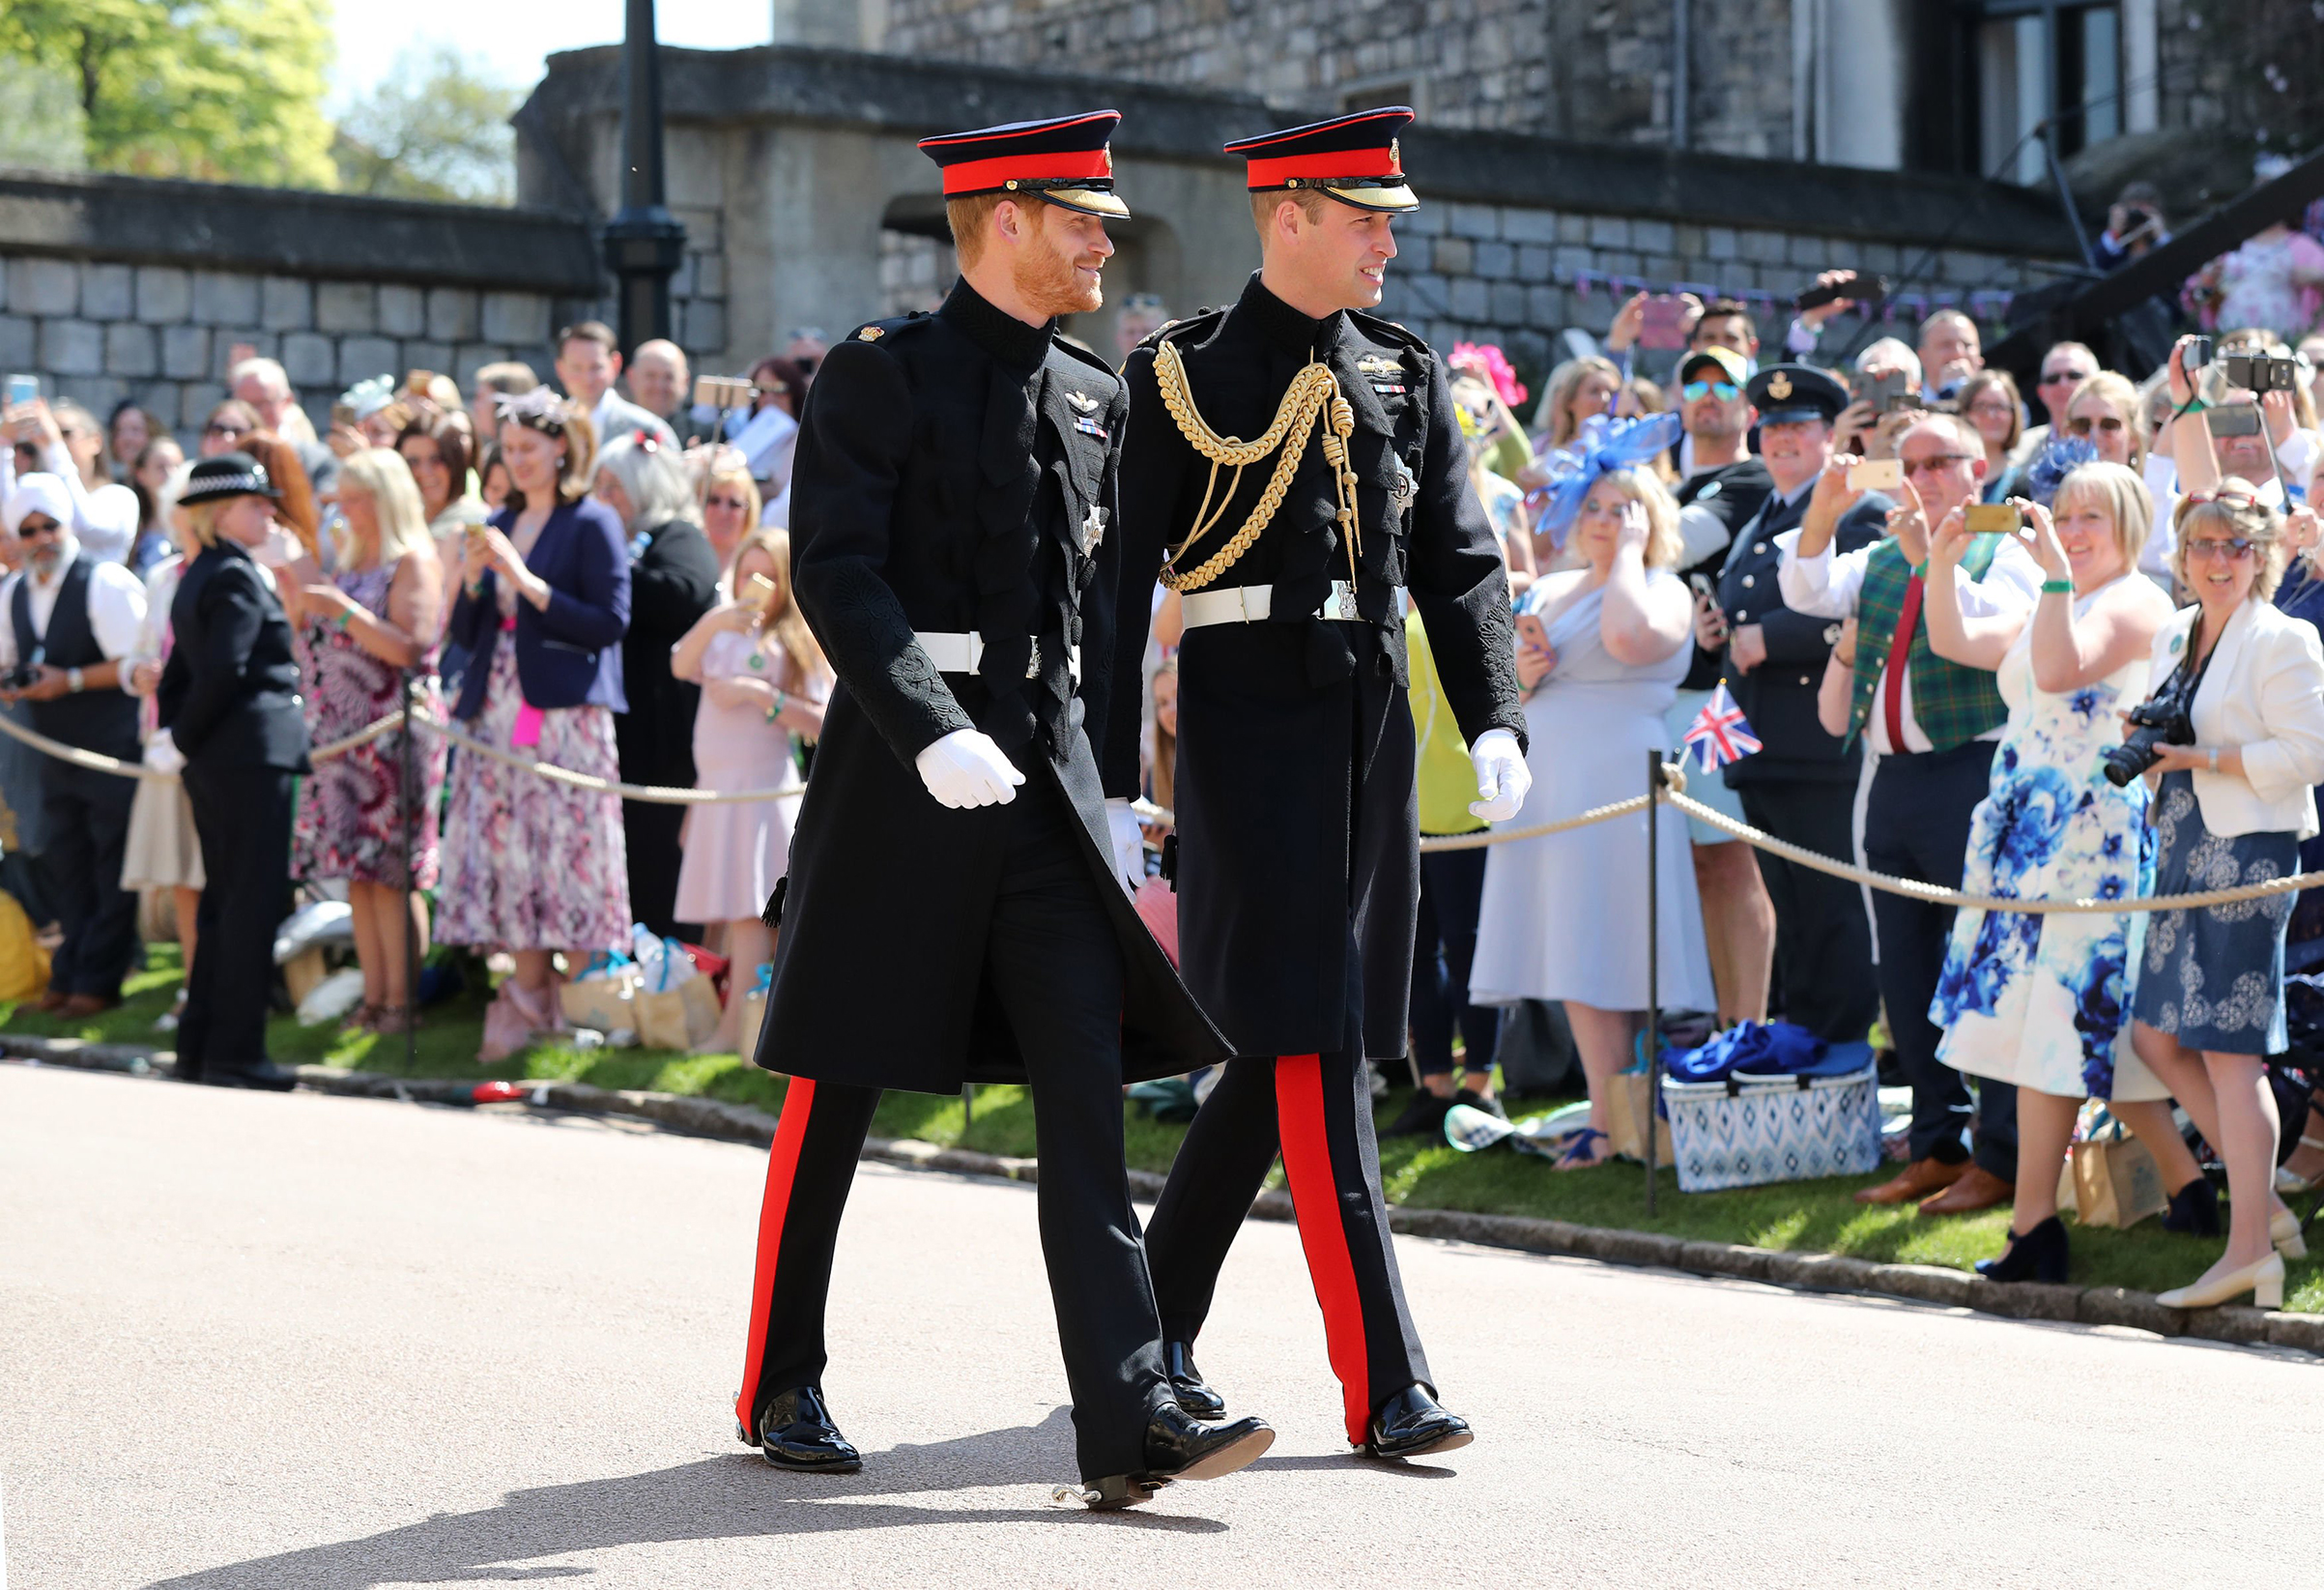 Prince Harry, Duke of Sussex, (left) arrives with his best man Prince William, Duke of Cambridge, at St George's Chapel, Windsor Castle, in Windsor, on May 19, 2018. (Gareth Fuller—AFP/Getty Images)